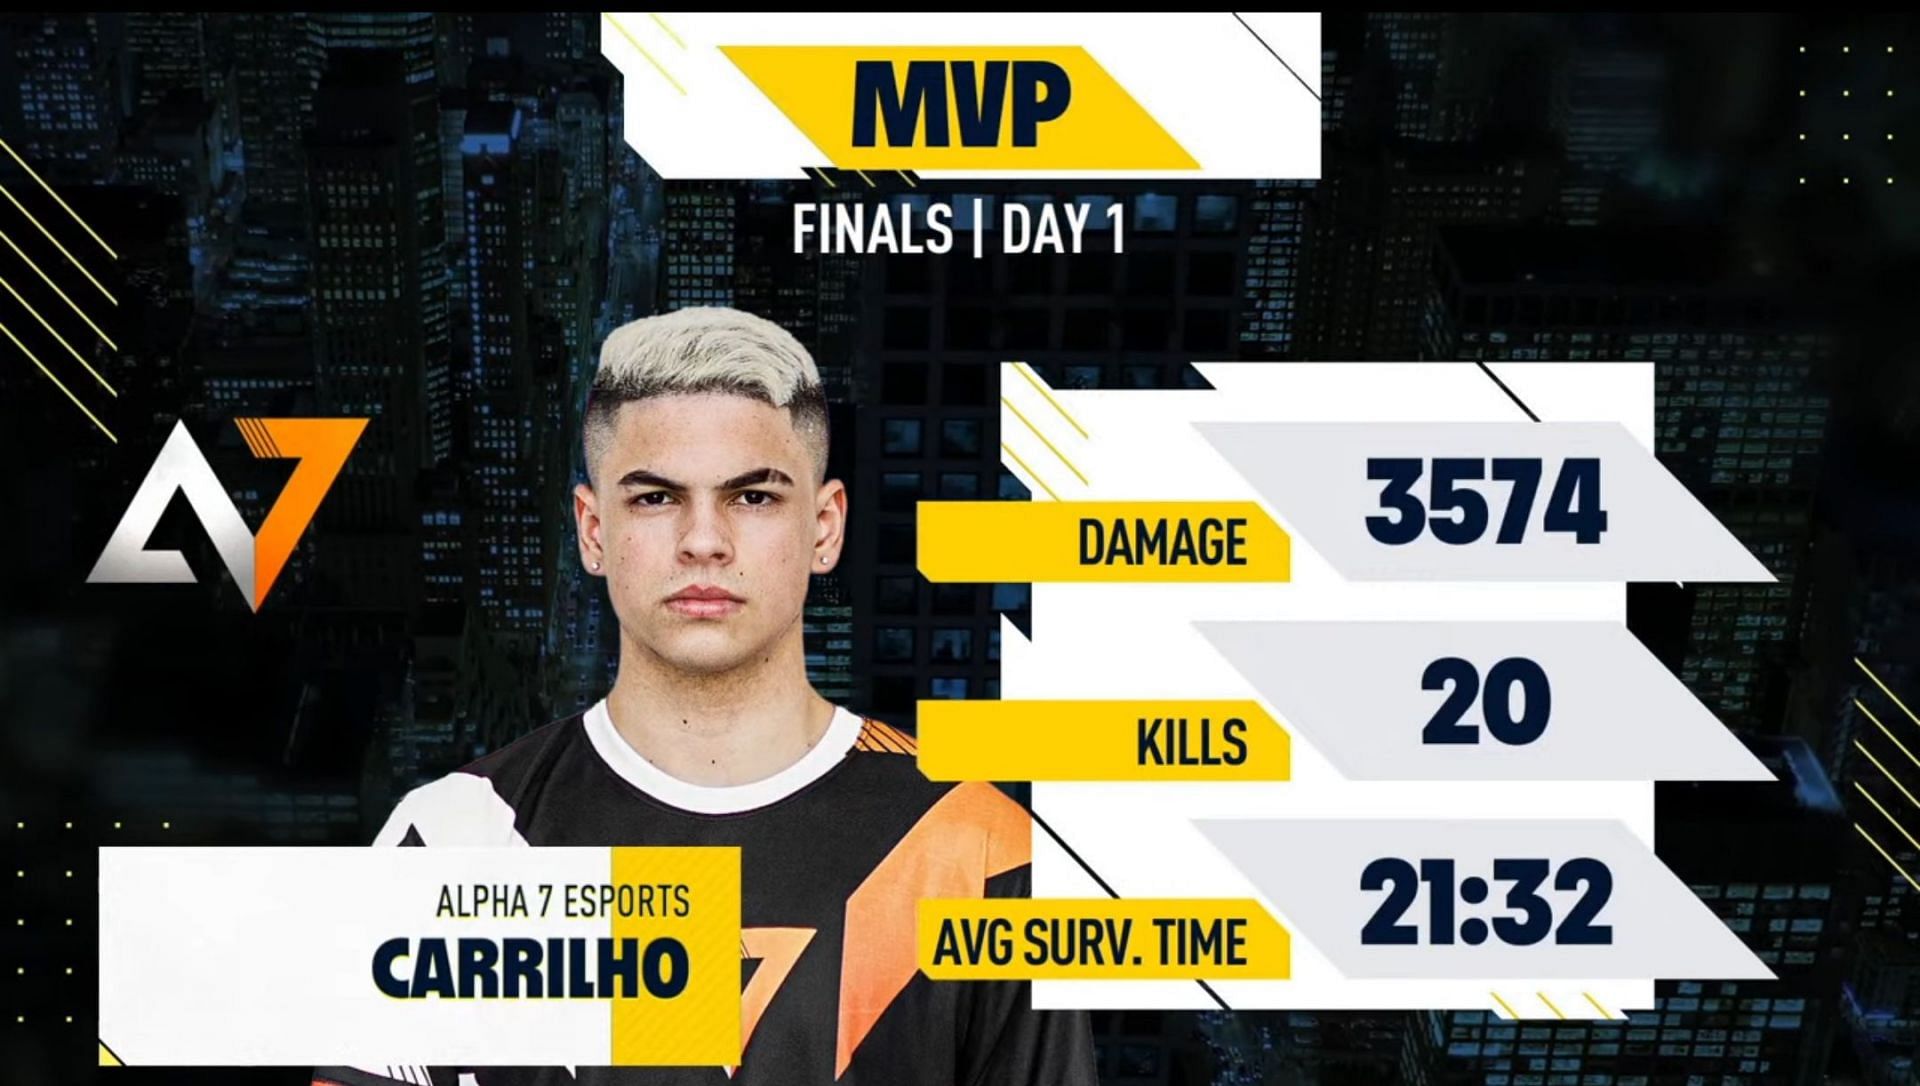 Carrilho was the MVP of PMPL Americas S2 day 1